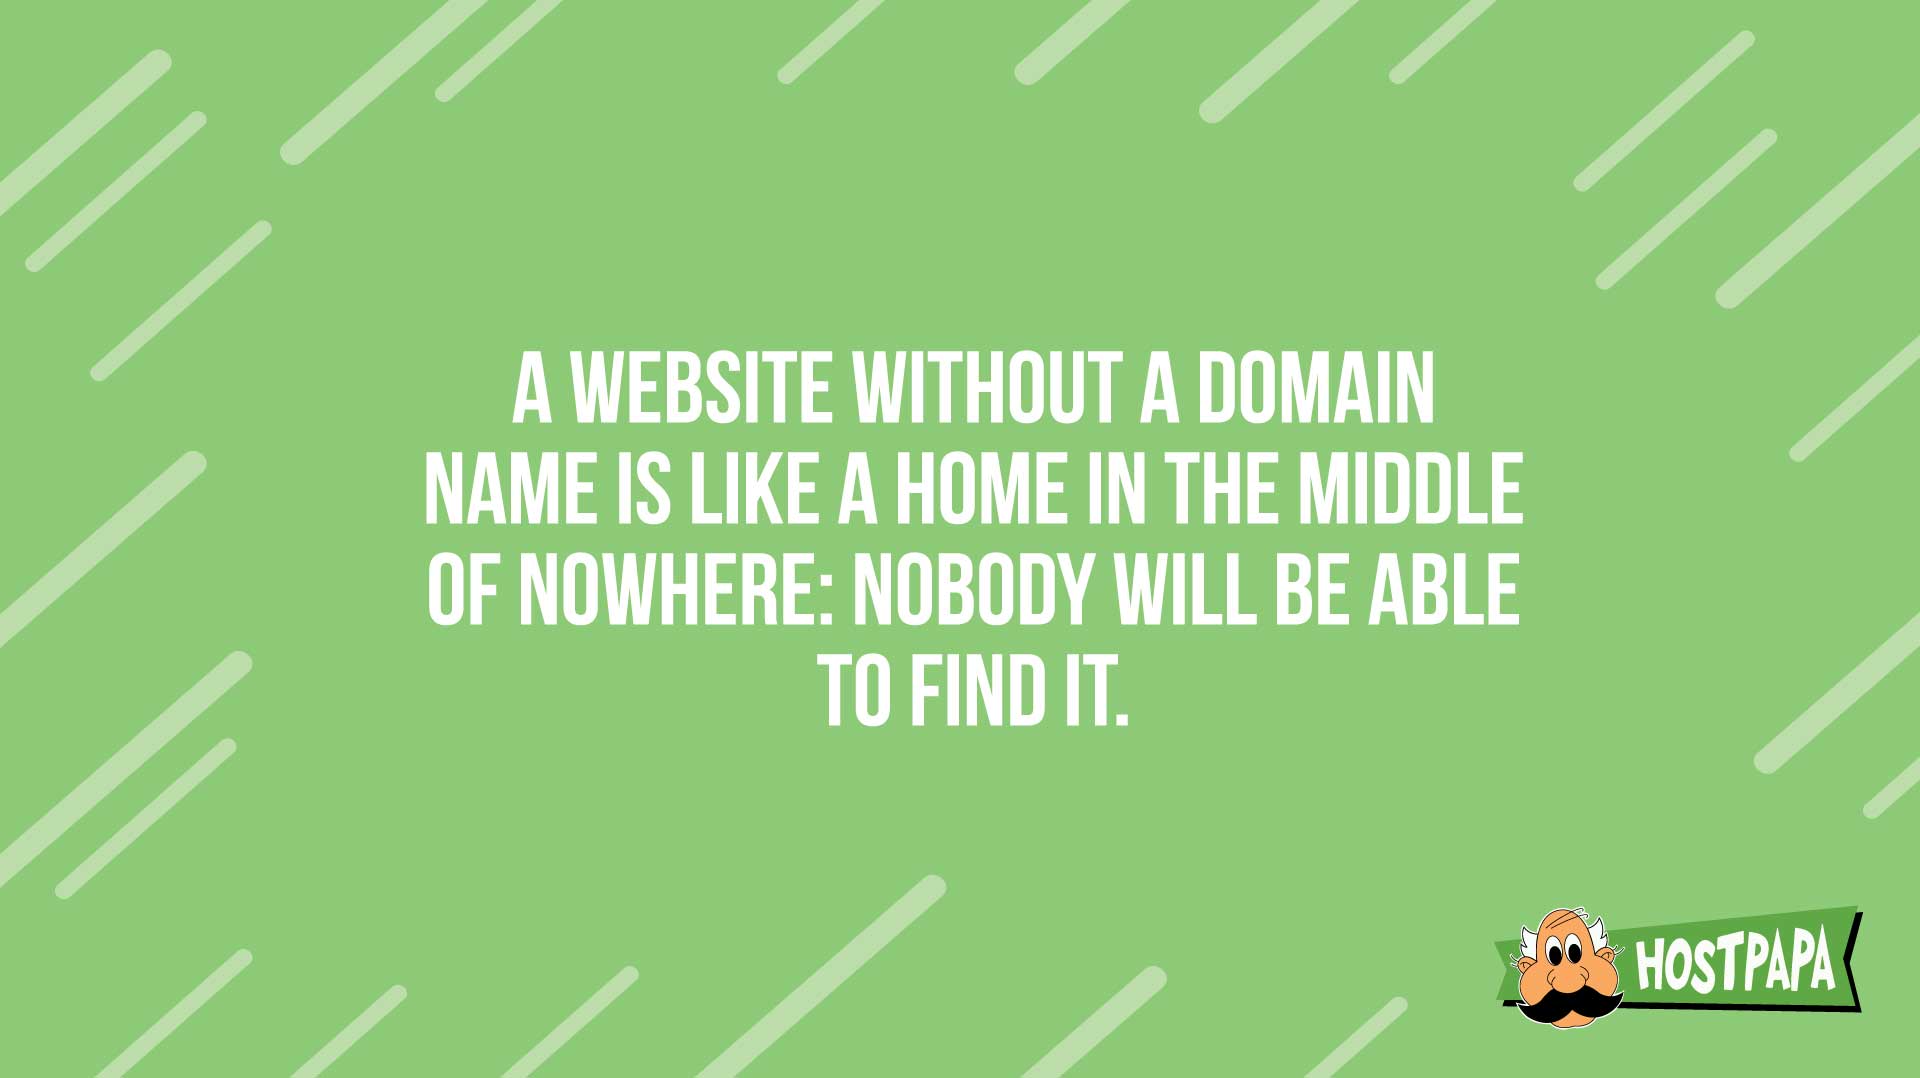 A website without a domain name is like a home in the middle of nowhere: nobody will be able to find it.